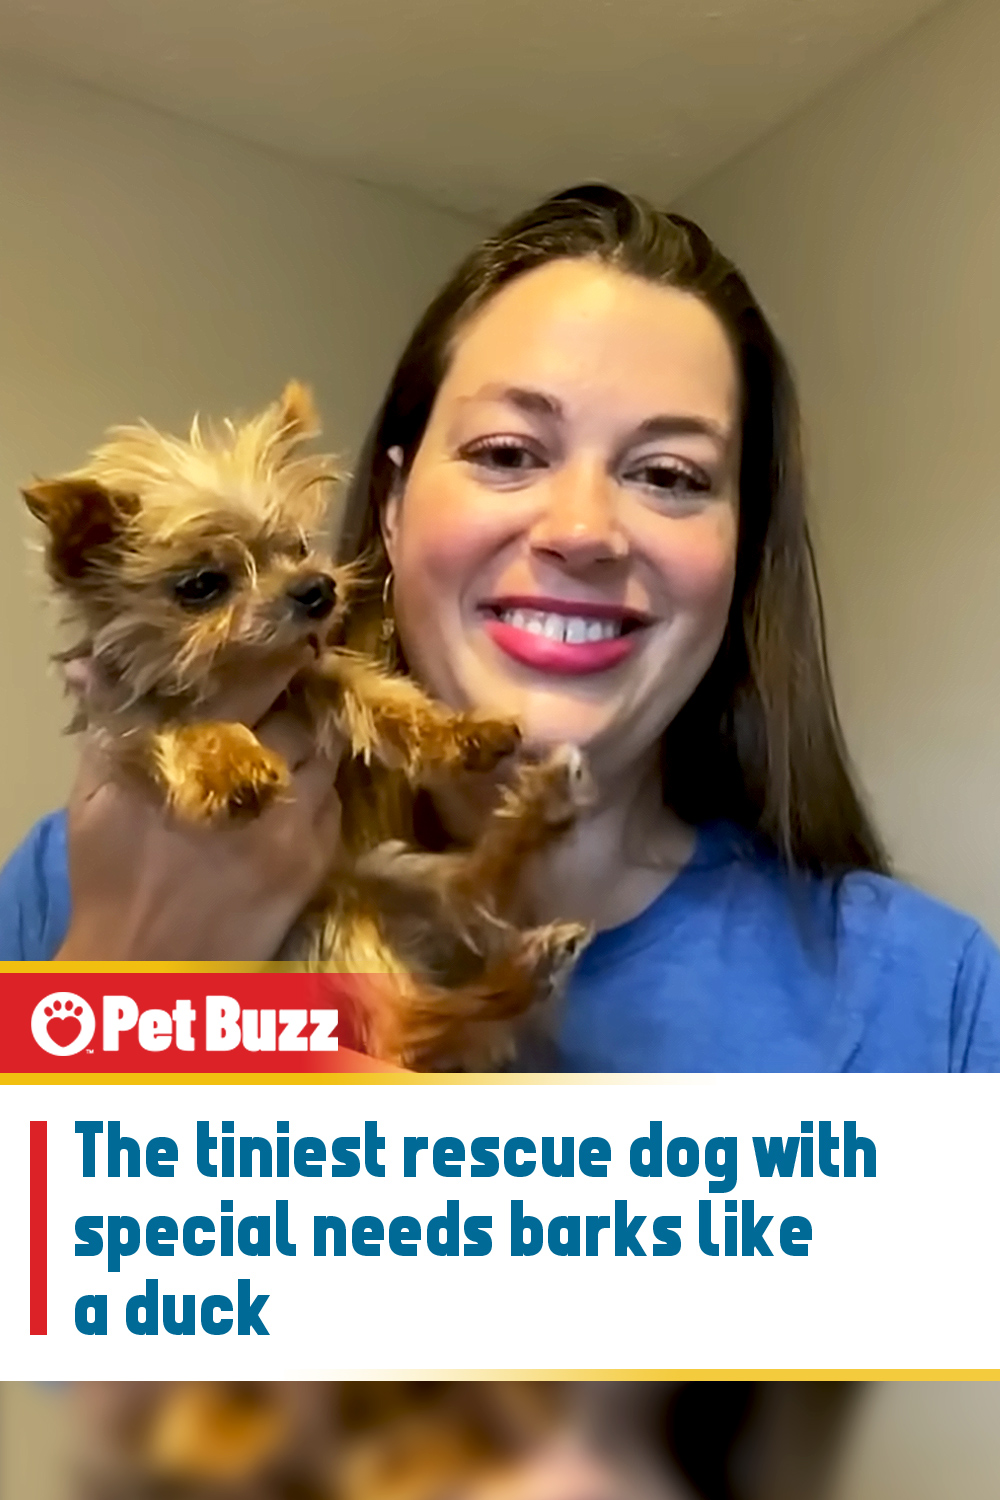 The tiniest rescue dog with special needs barks like a duck